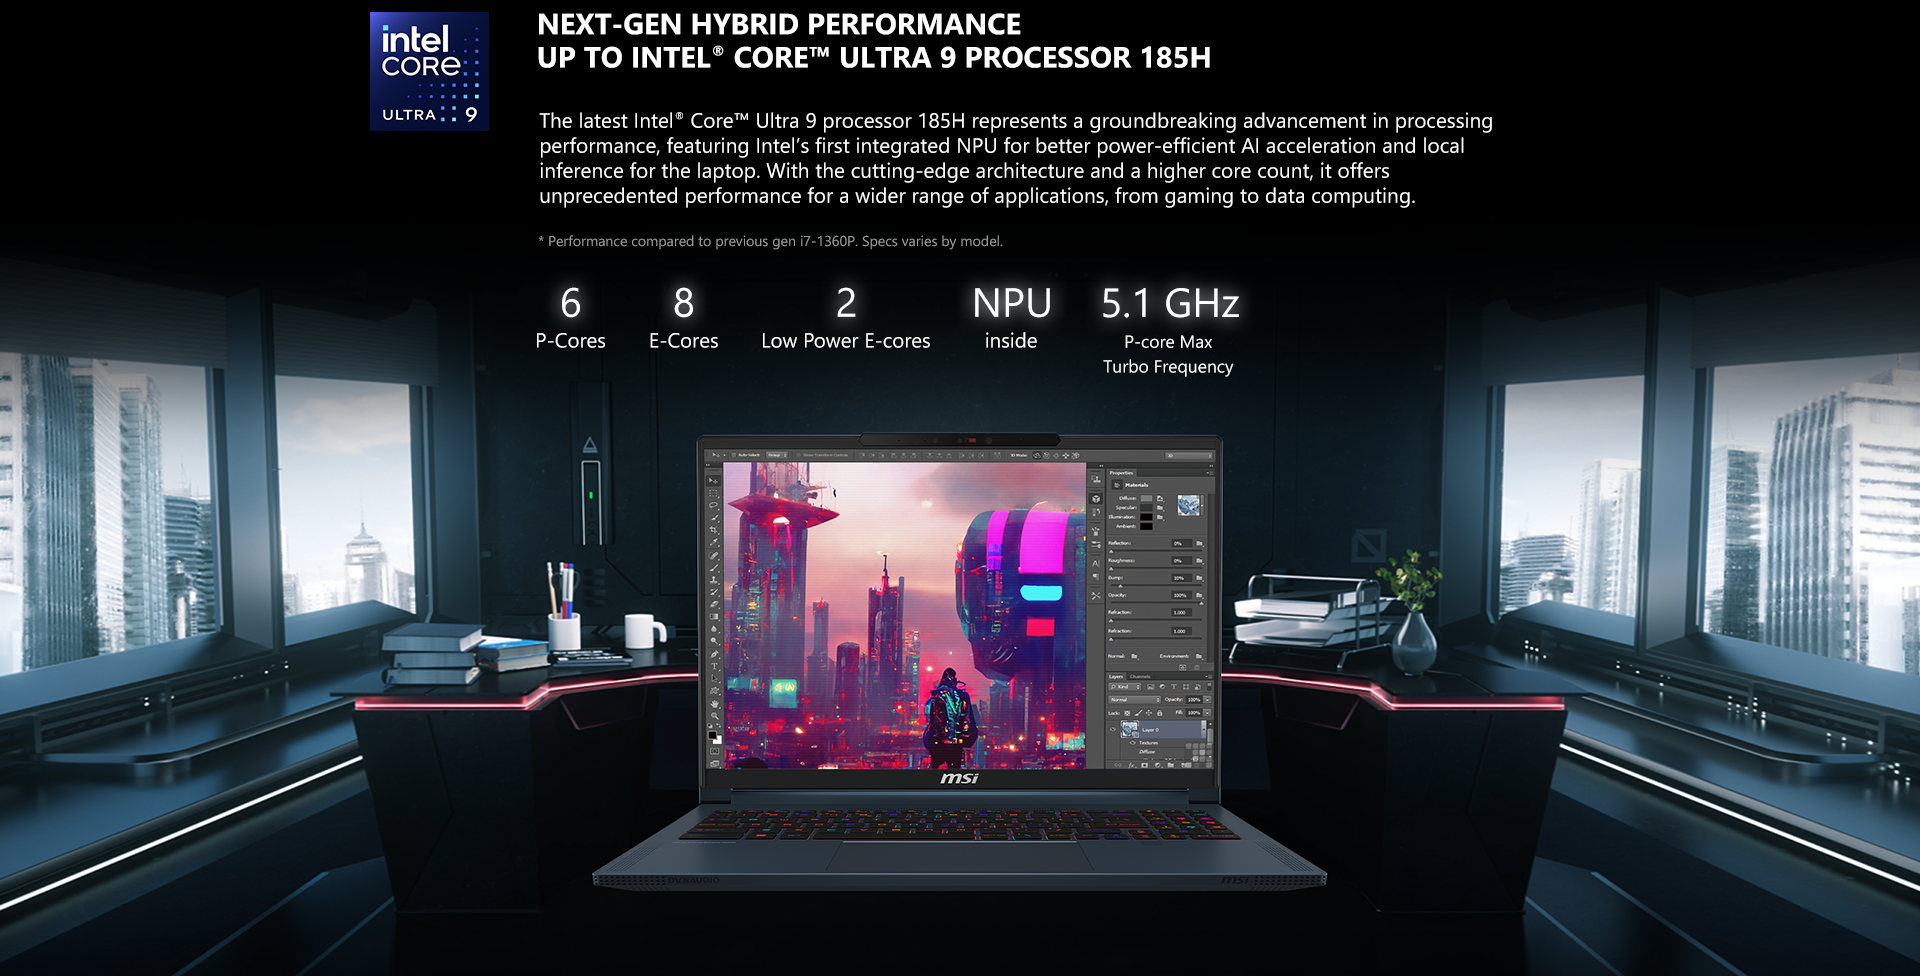 The latest Intel® Core™ Ultra 9 processor 185H represents a groundbreaking advancement in processing performance, featuring Intel’s first integrated NPU for better power-efficient AI acceleration and local inference for the laptop. With the cutting-edge architecture and a higher core count, it offers unprecedented performance for a wider range of applications, from gaming to data computing. 